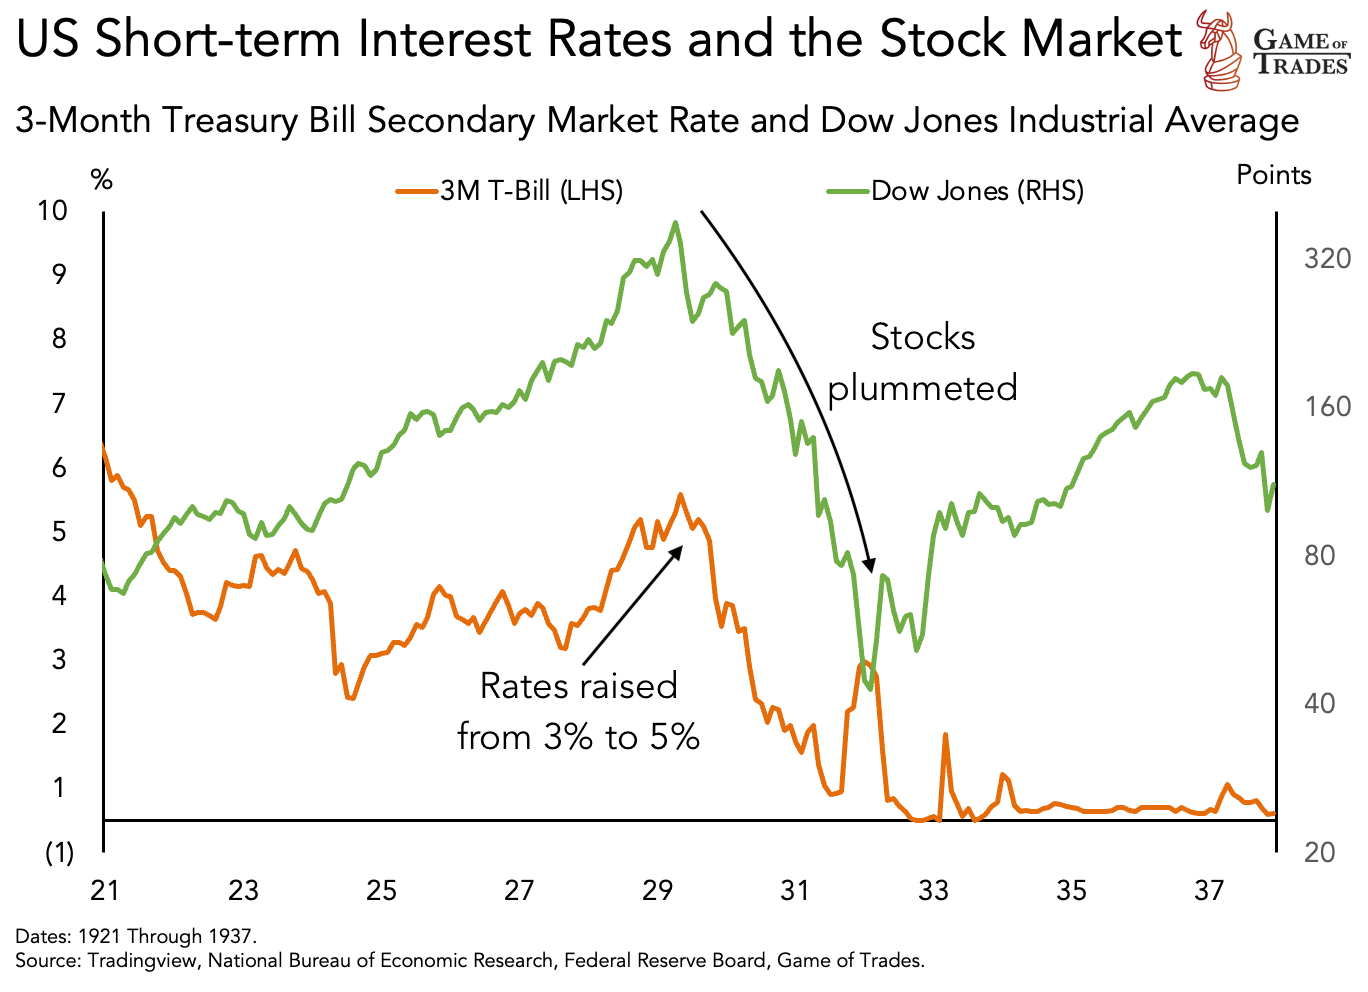 US Short-term Interest Rates and Stock Market